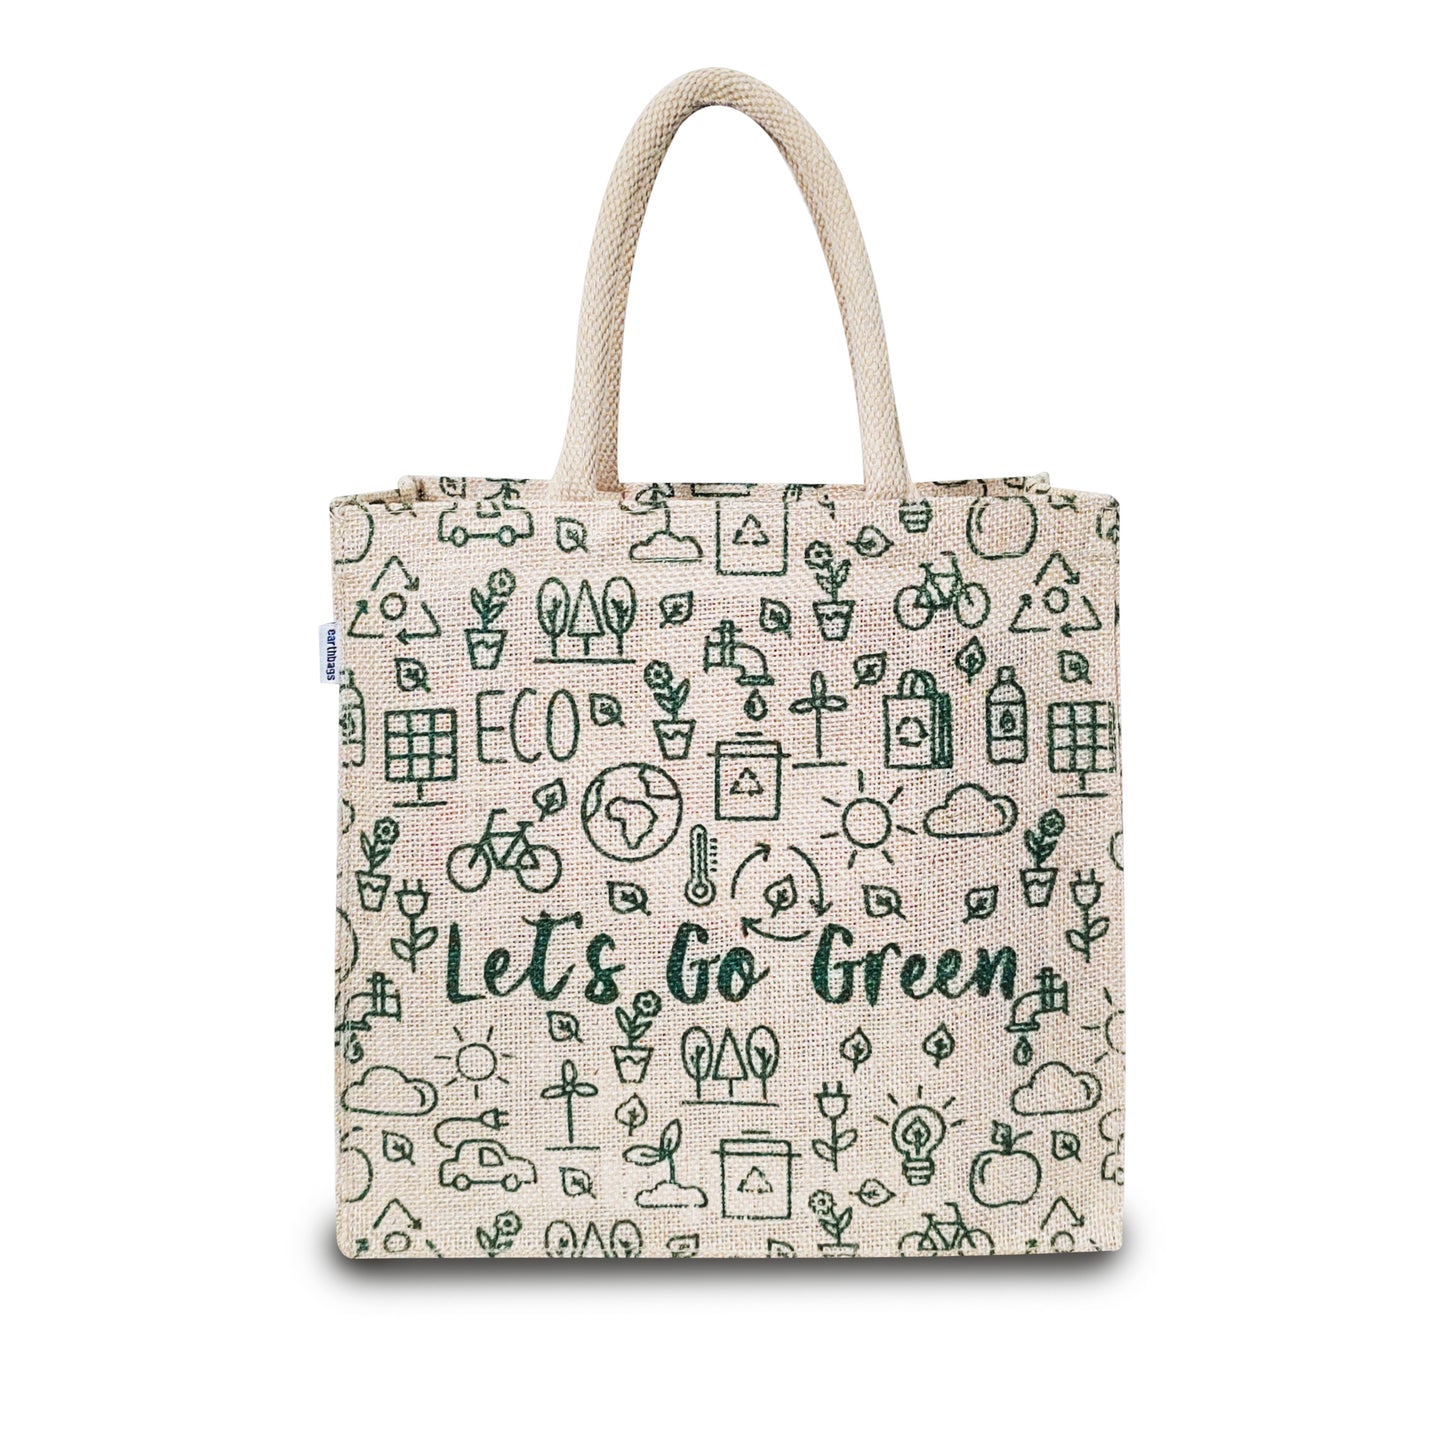 GO GREEN WITH OUR ECO-FRIENDLY JUCO BAG